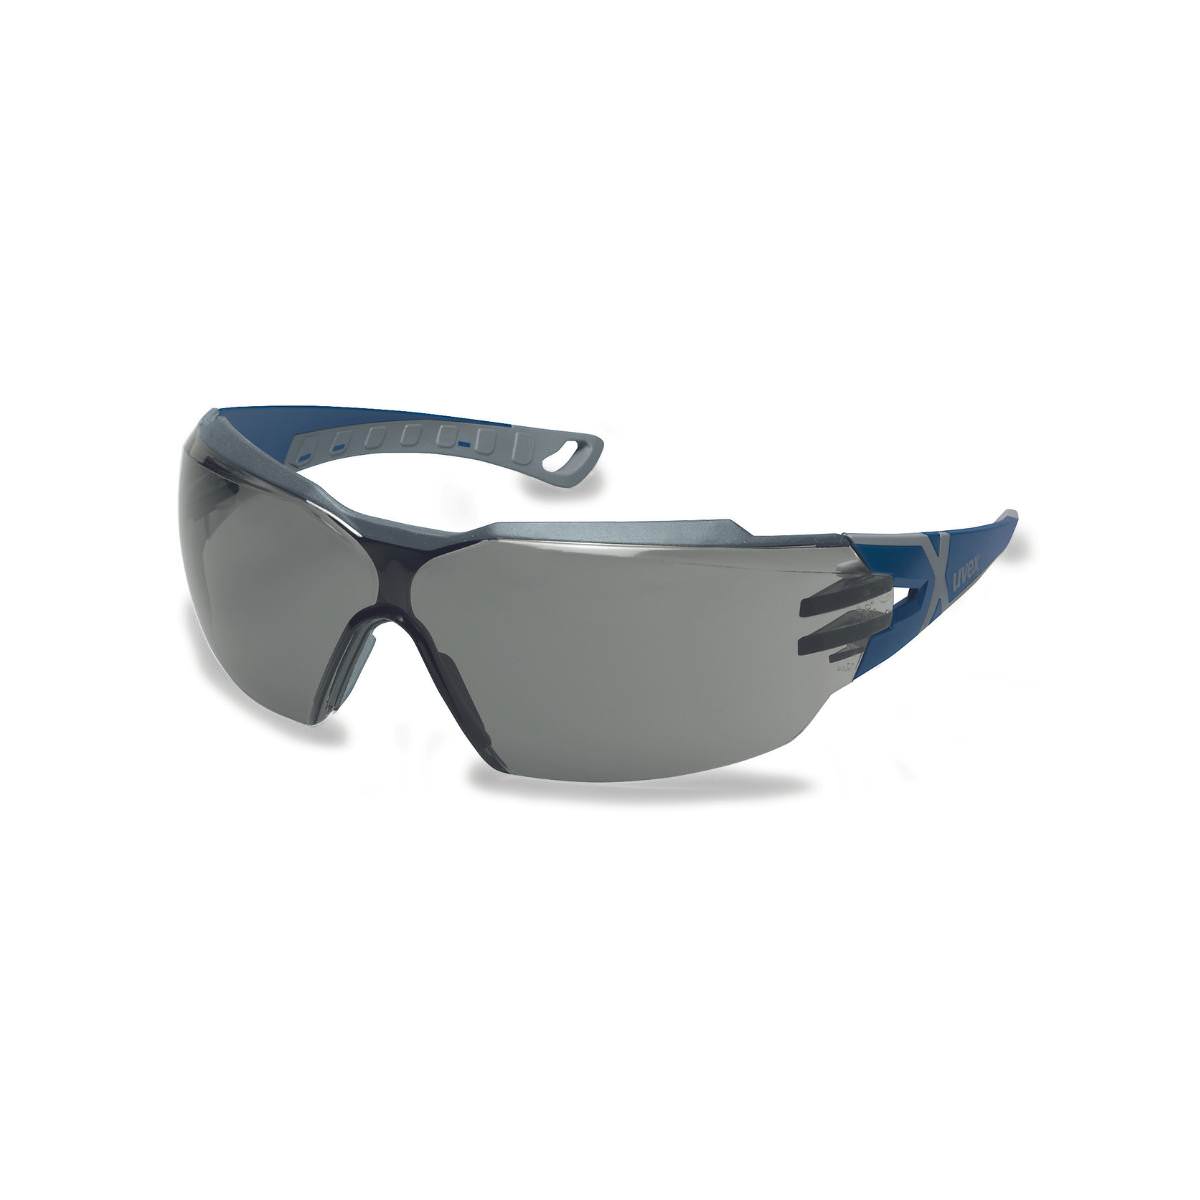 uvex Pheos cx2 Safety Glasses - Grey Lens 9198-301 (Pack of 10)